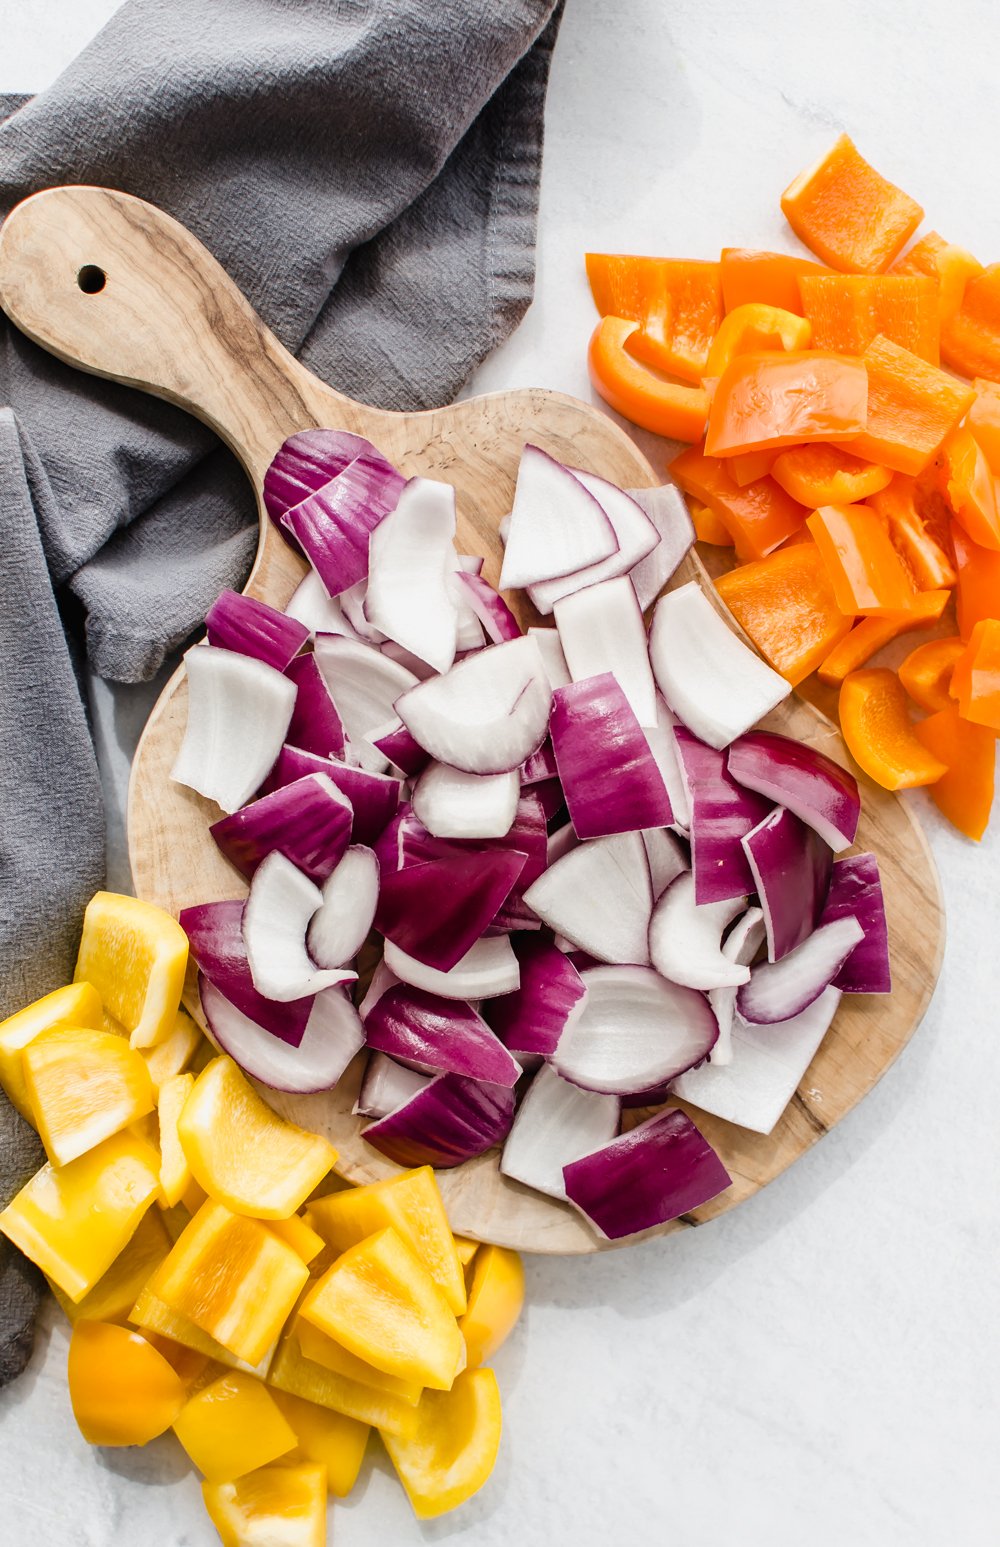 Chopped up red onion and bell peppers in piles on a small wooden cutting board.